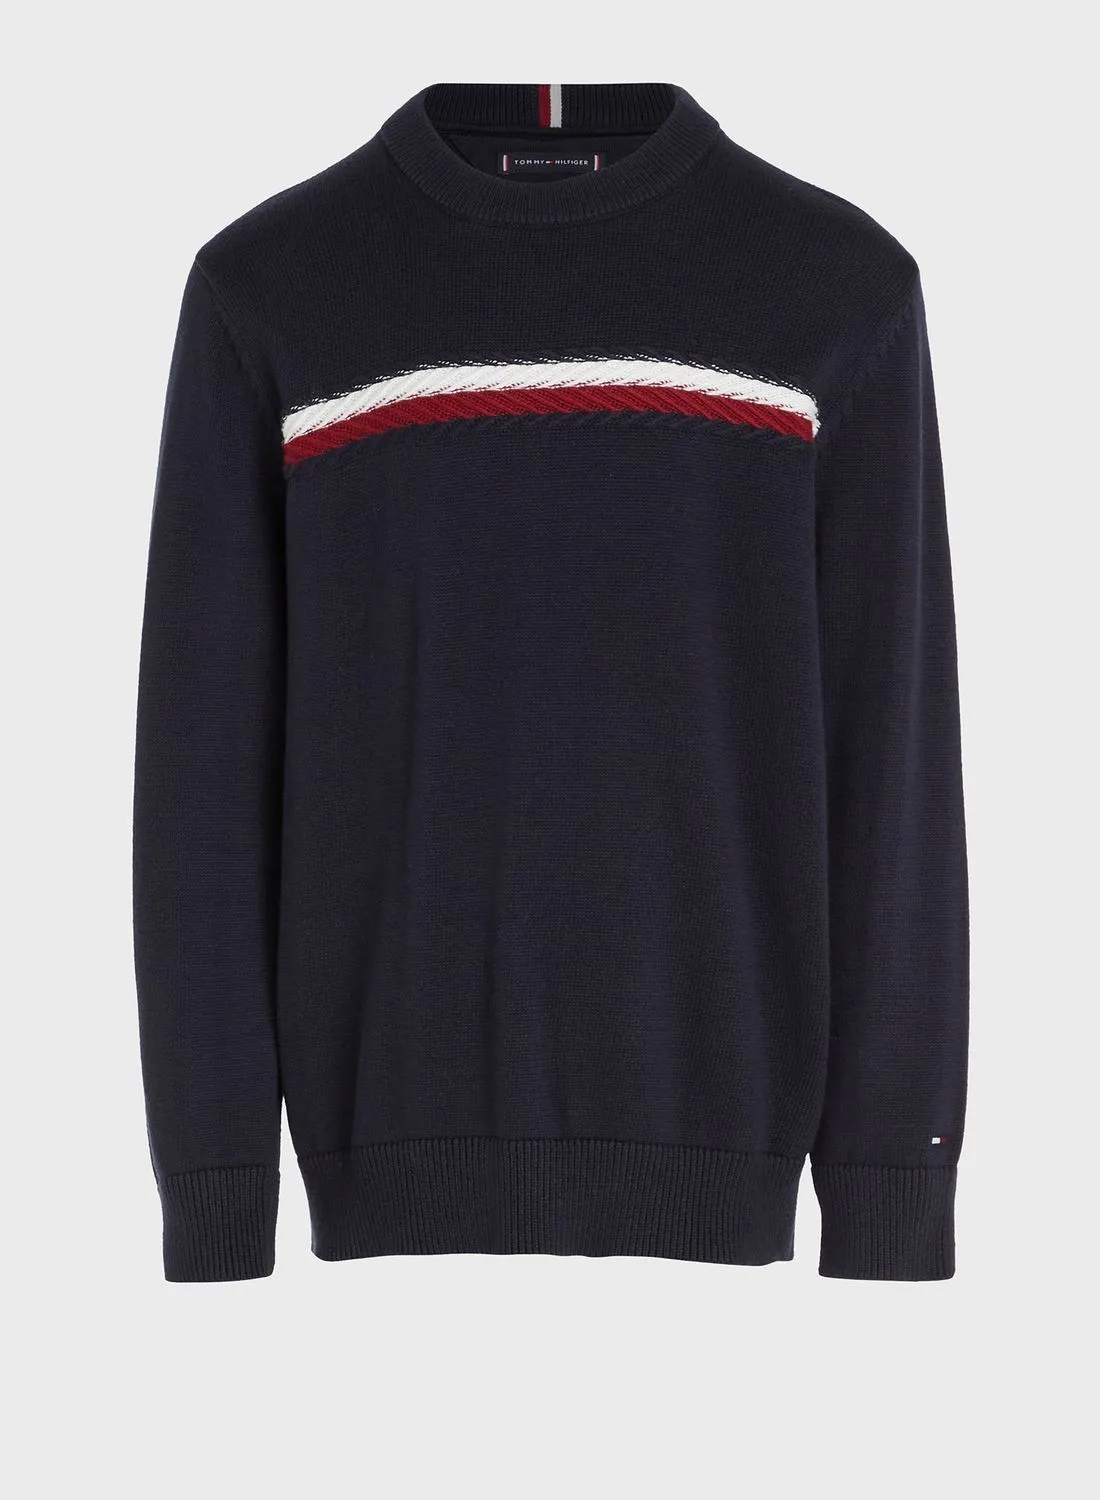 TOMMY HILFIGER Youth Striped Sweater